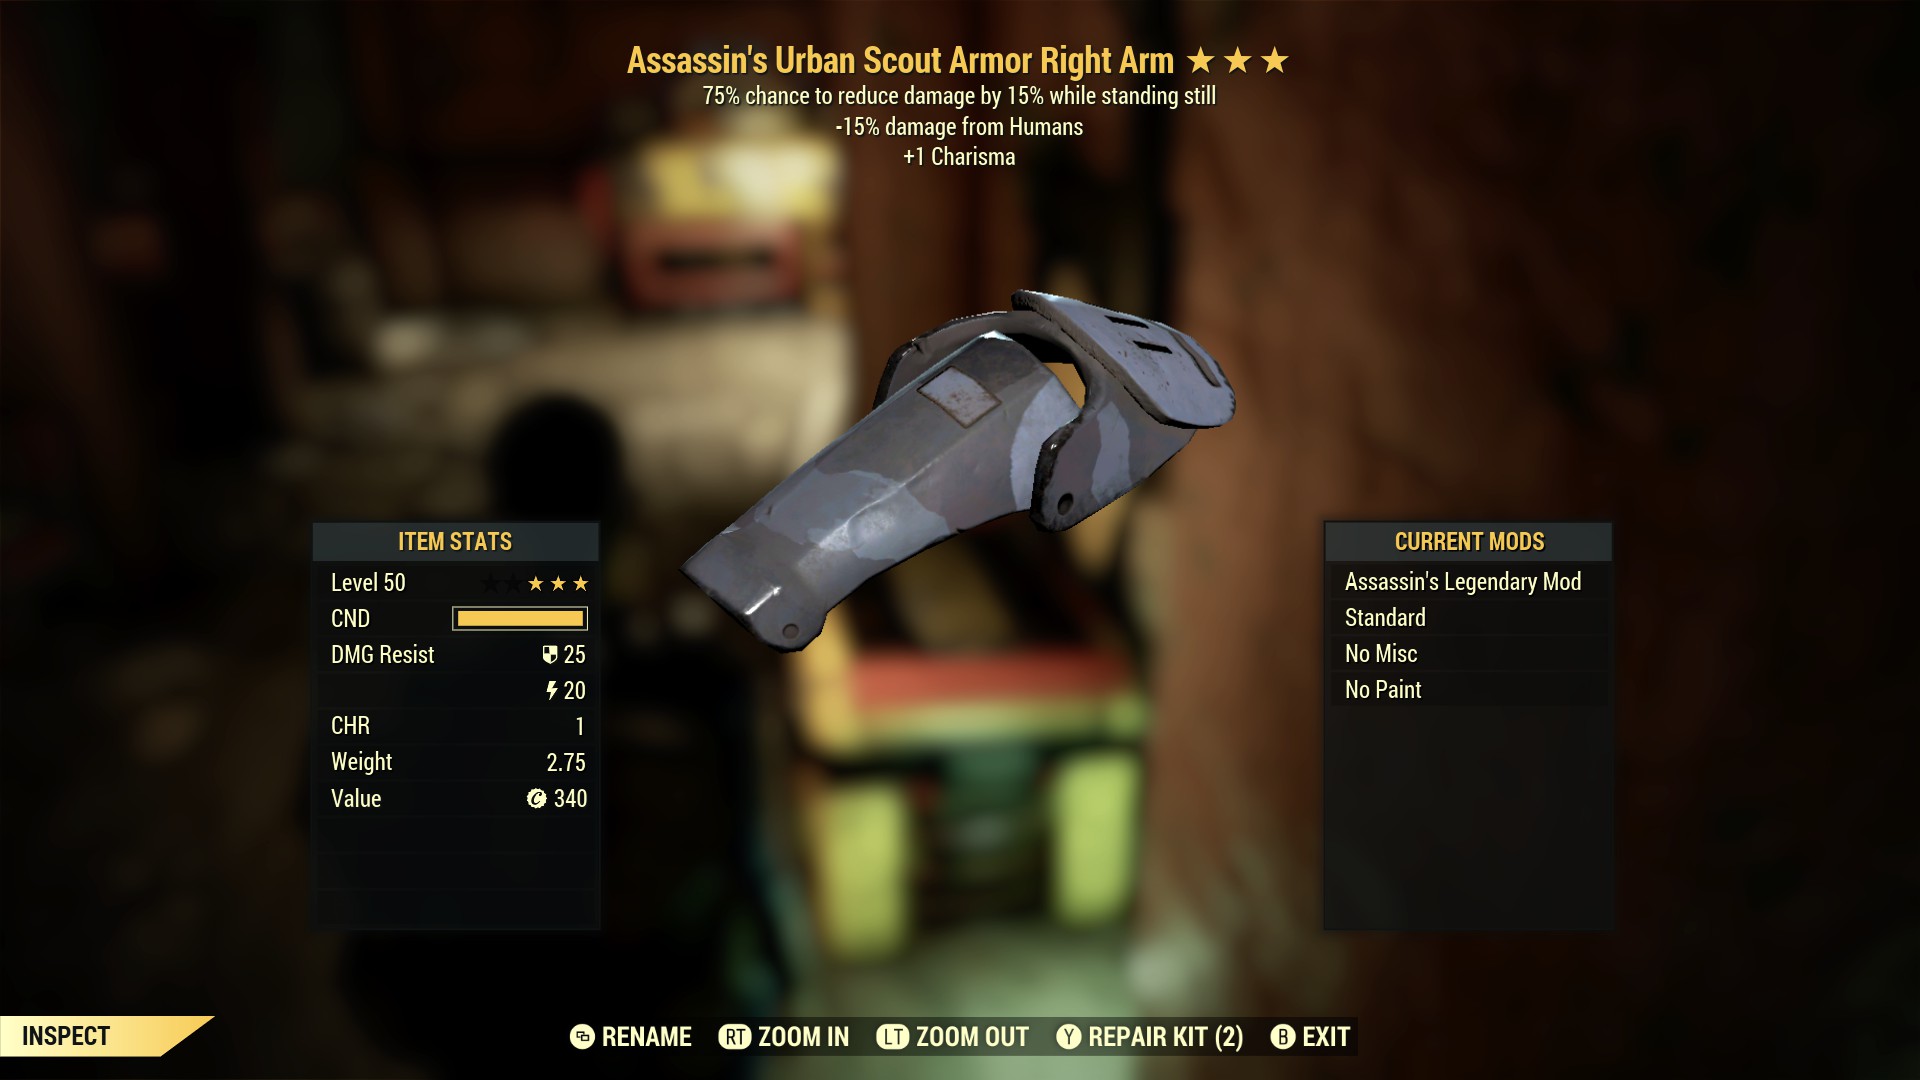 Assassin's Urban Scout Armor Right Arm